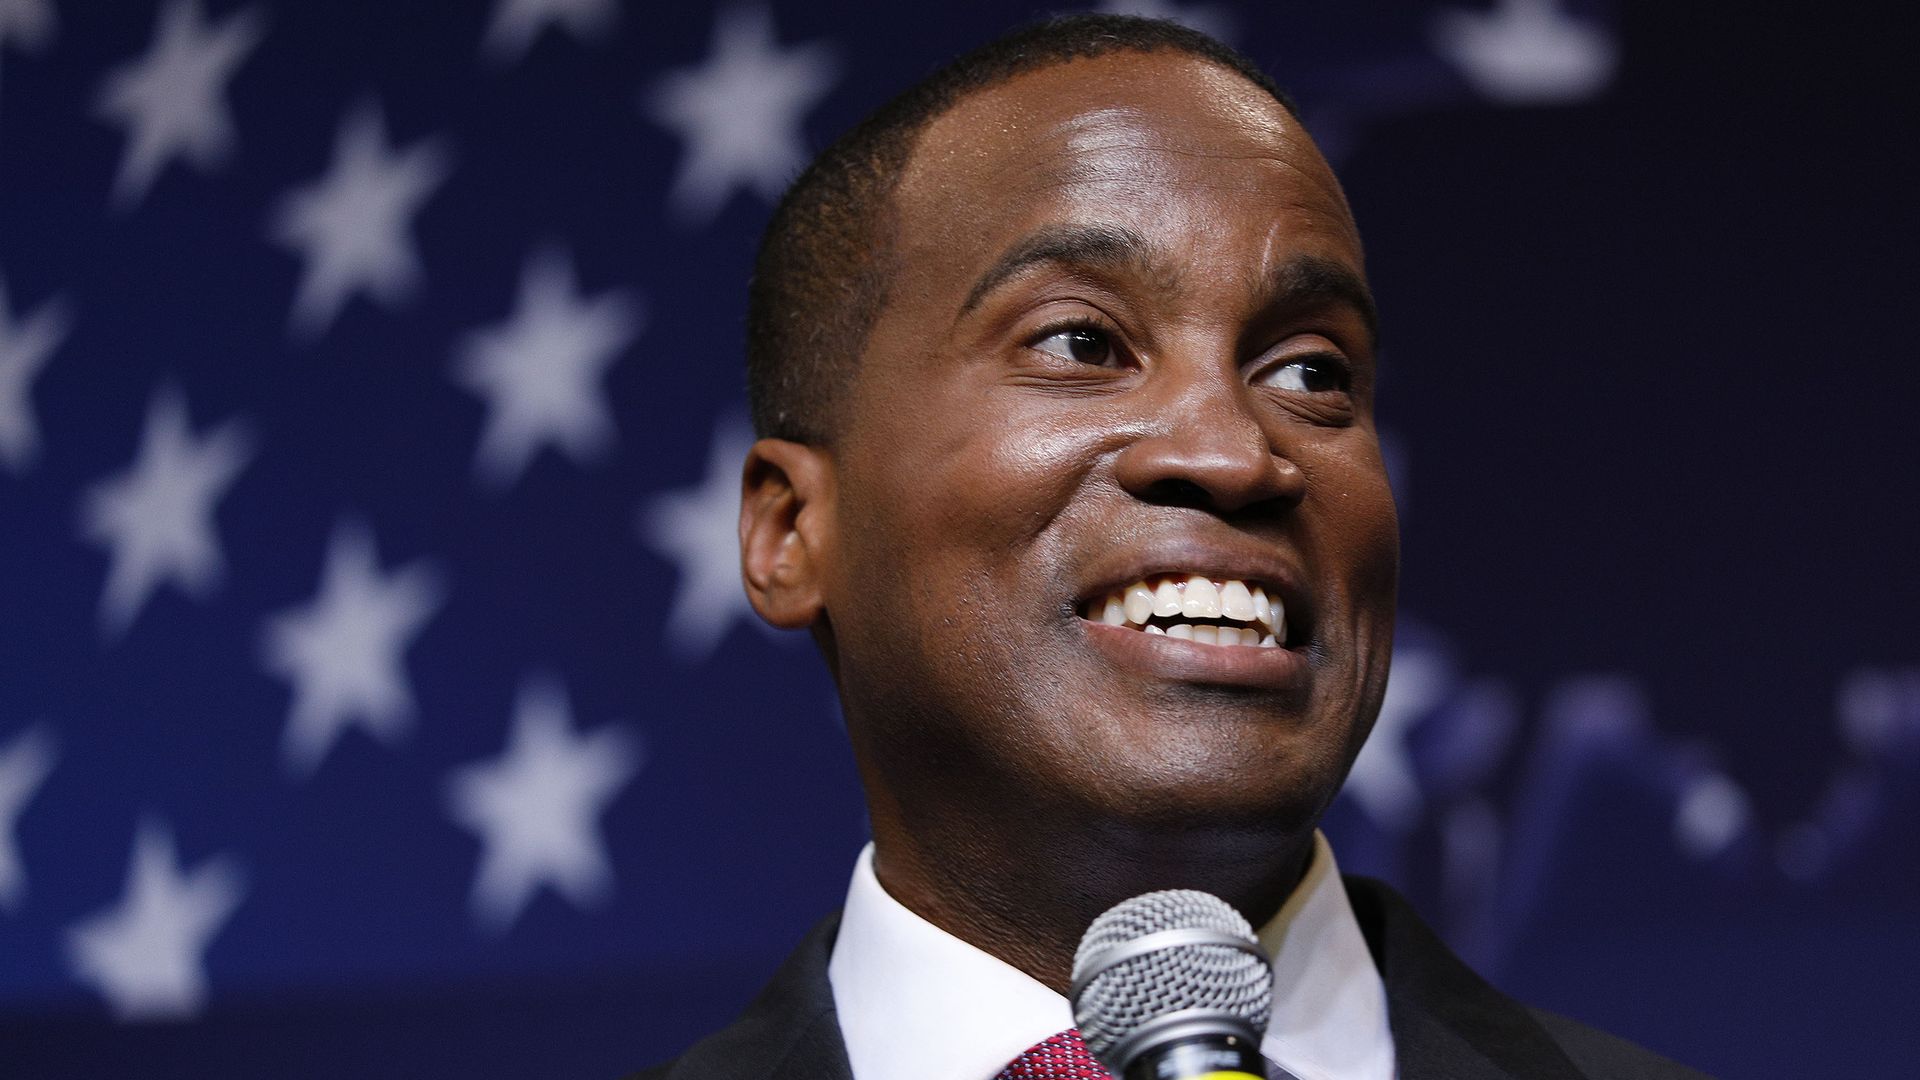 John James holding a microphone with an American flag in the background.